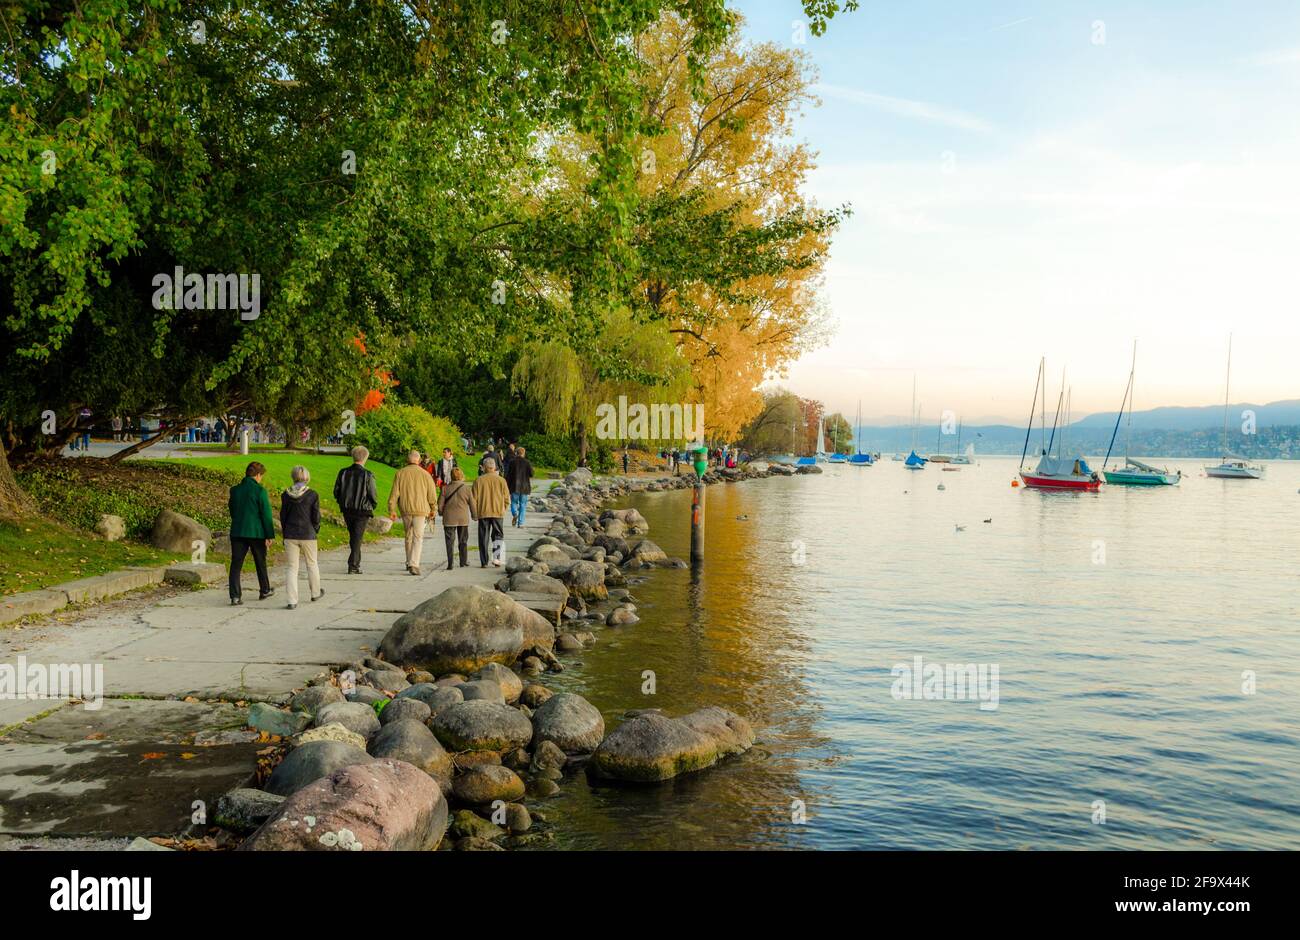 ZURICH, SWITZERLAND, OCTOBER 24, 2015: people are walking on a sunny promenade along the zurich lake in switzerland during late autumn afternoon Stock Photo